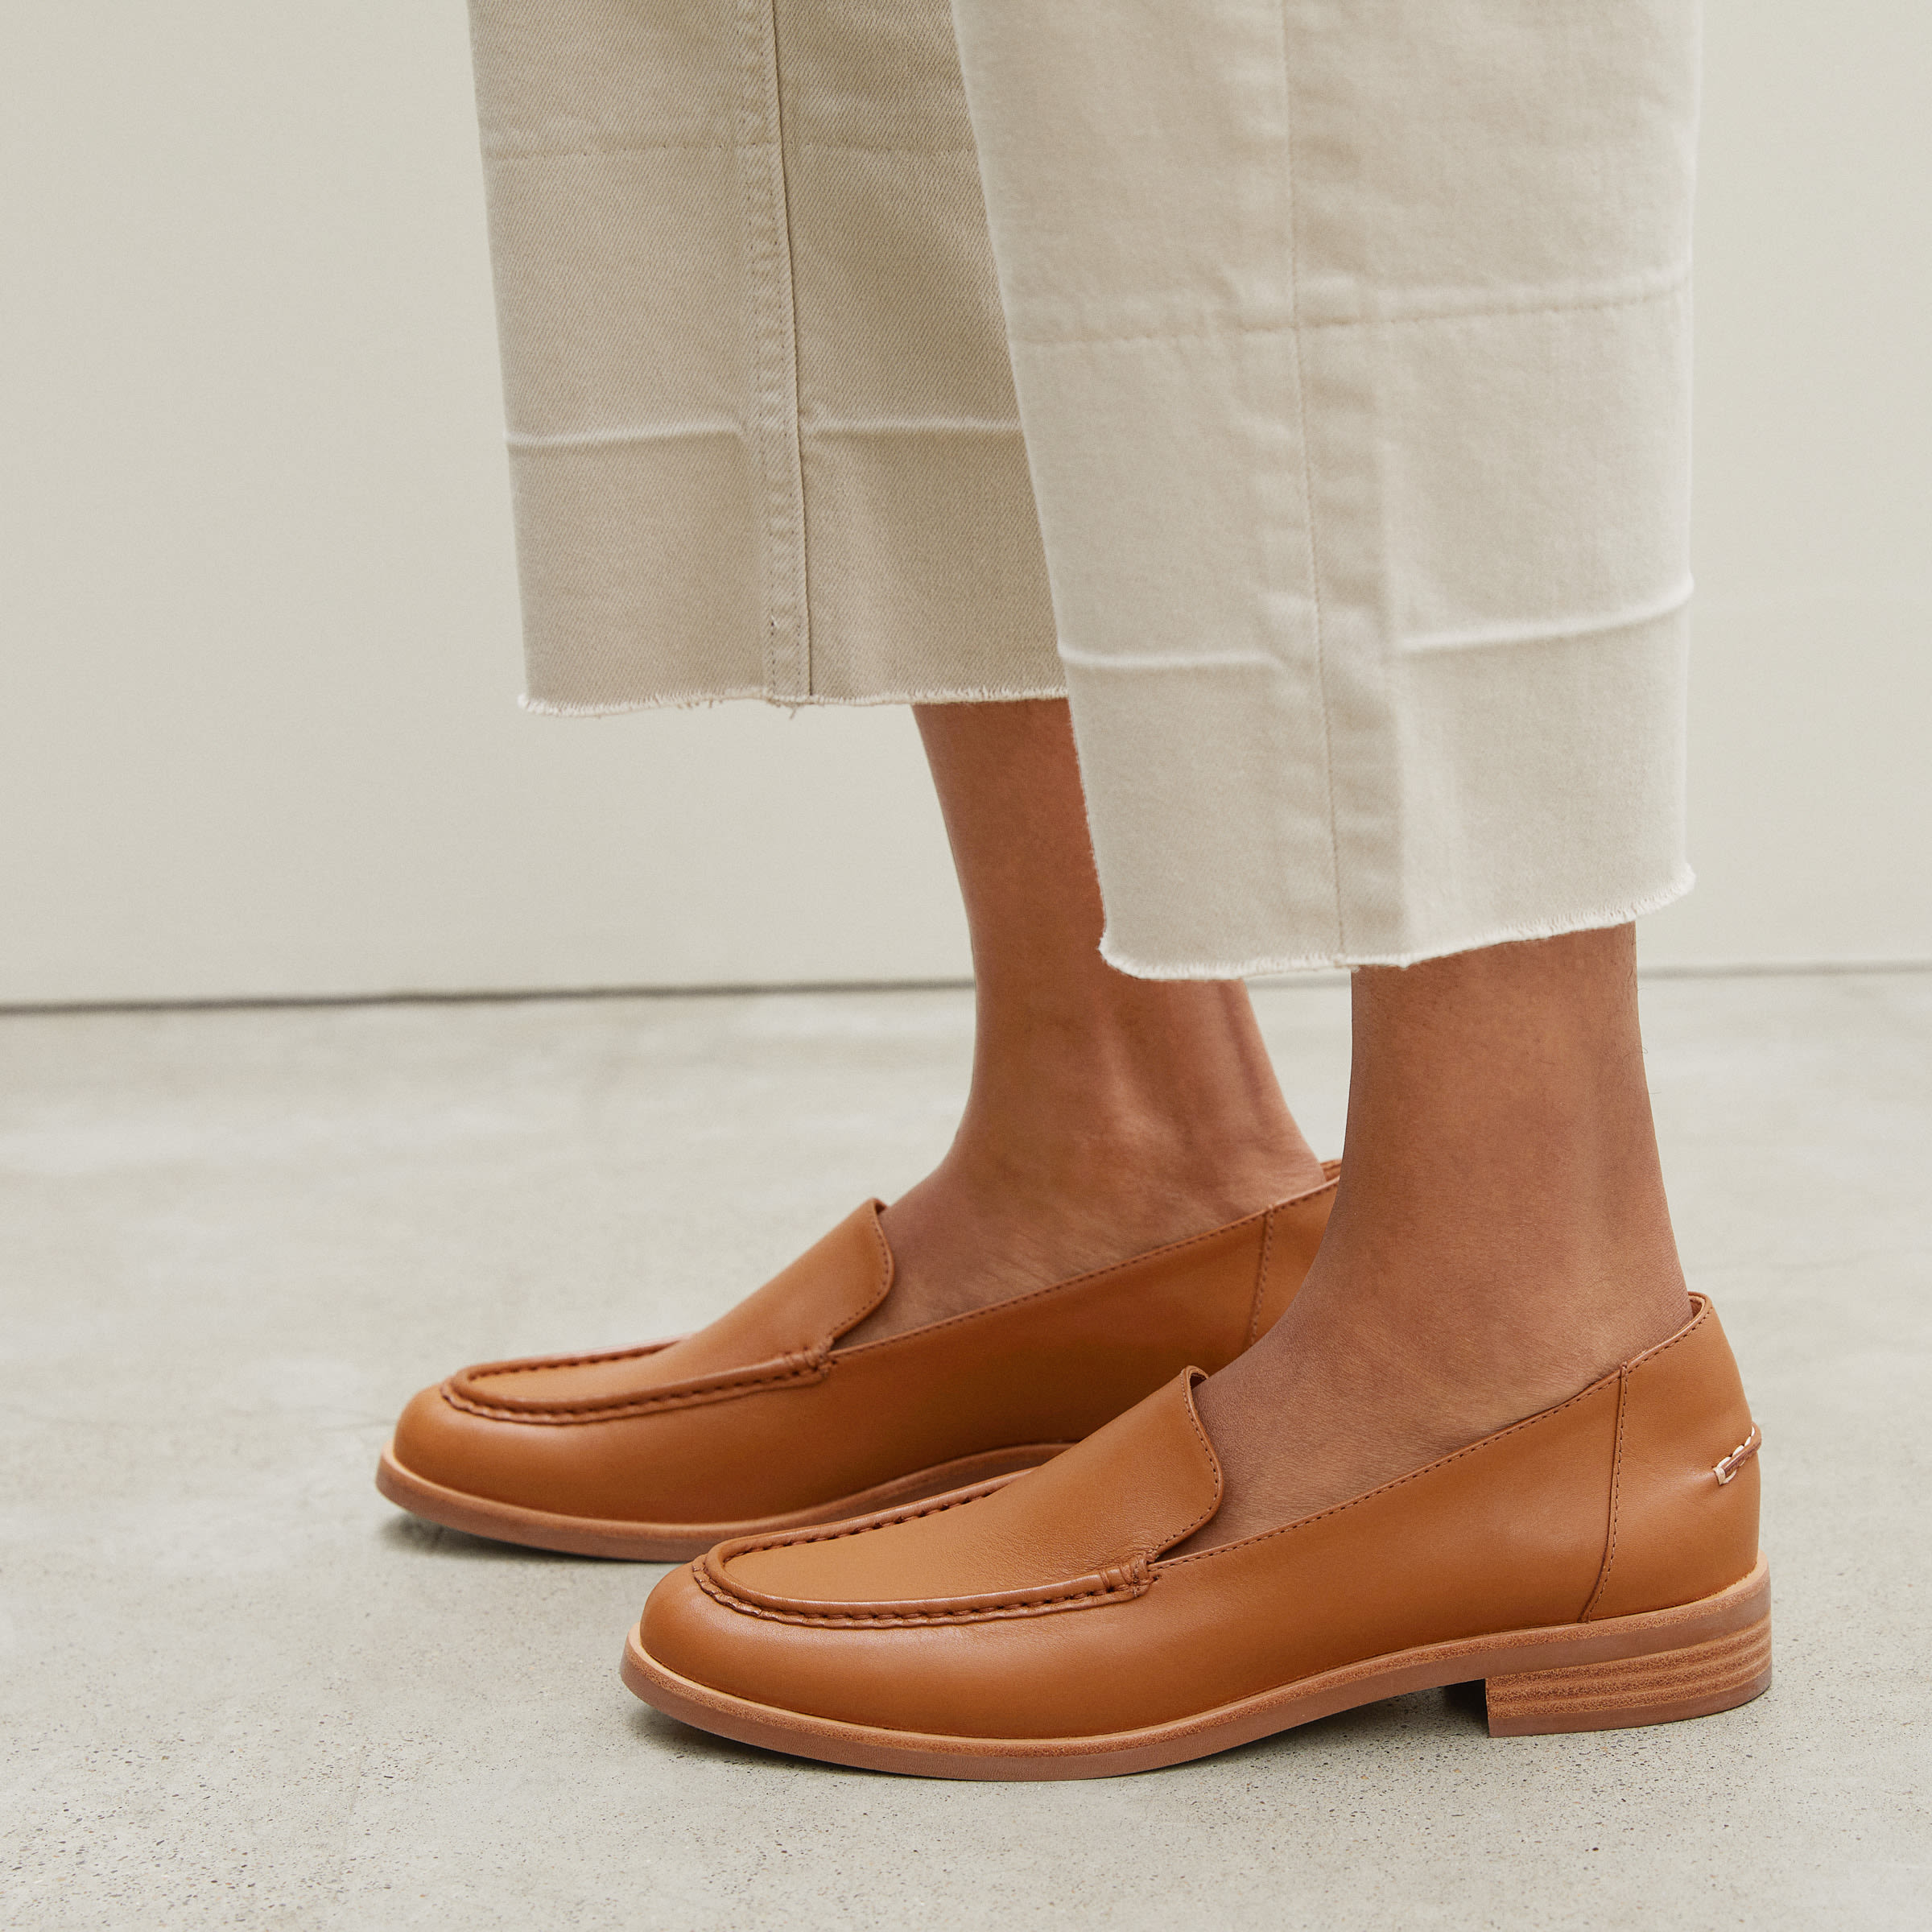 Everlane Modern Loafer Review: How They Look, Fit, And Feel | lupon.gov.ph